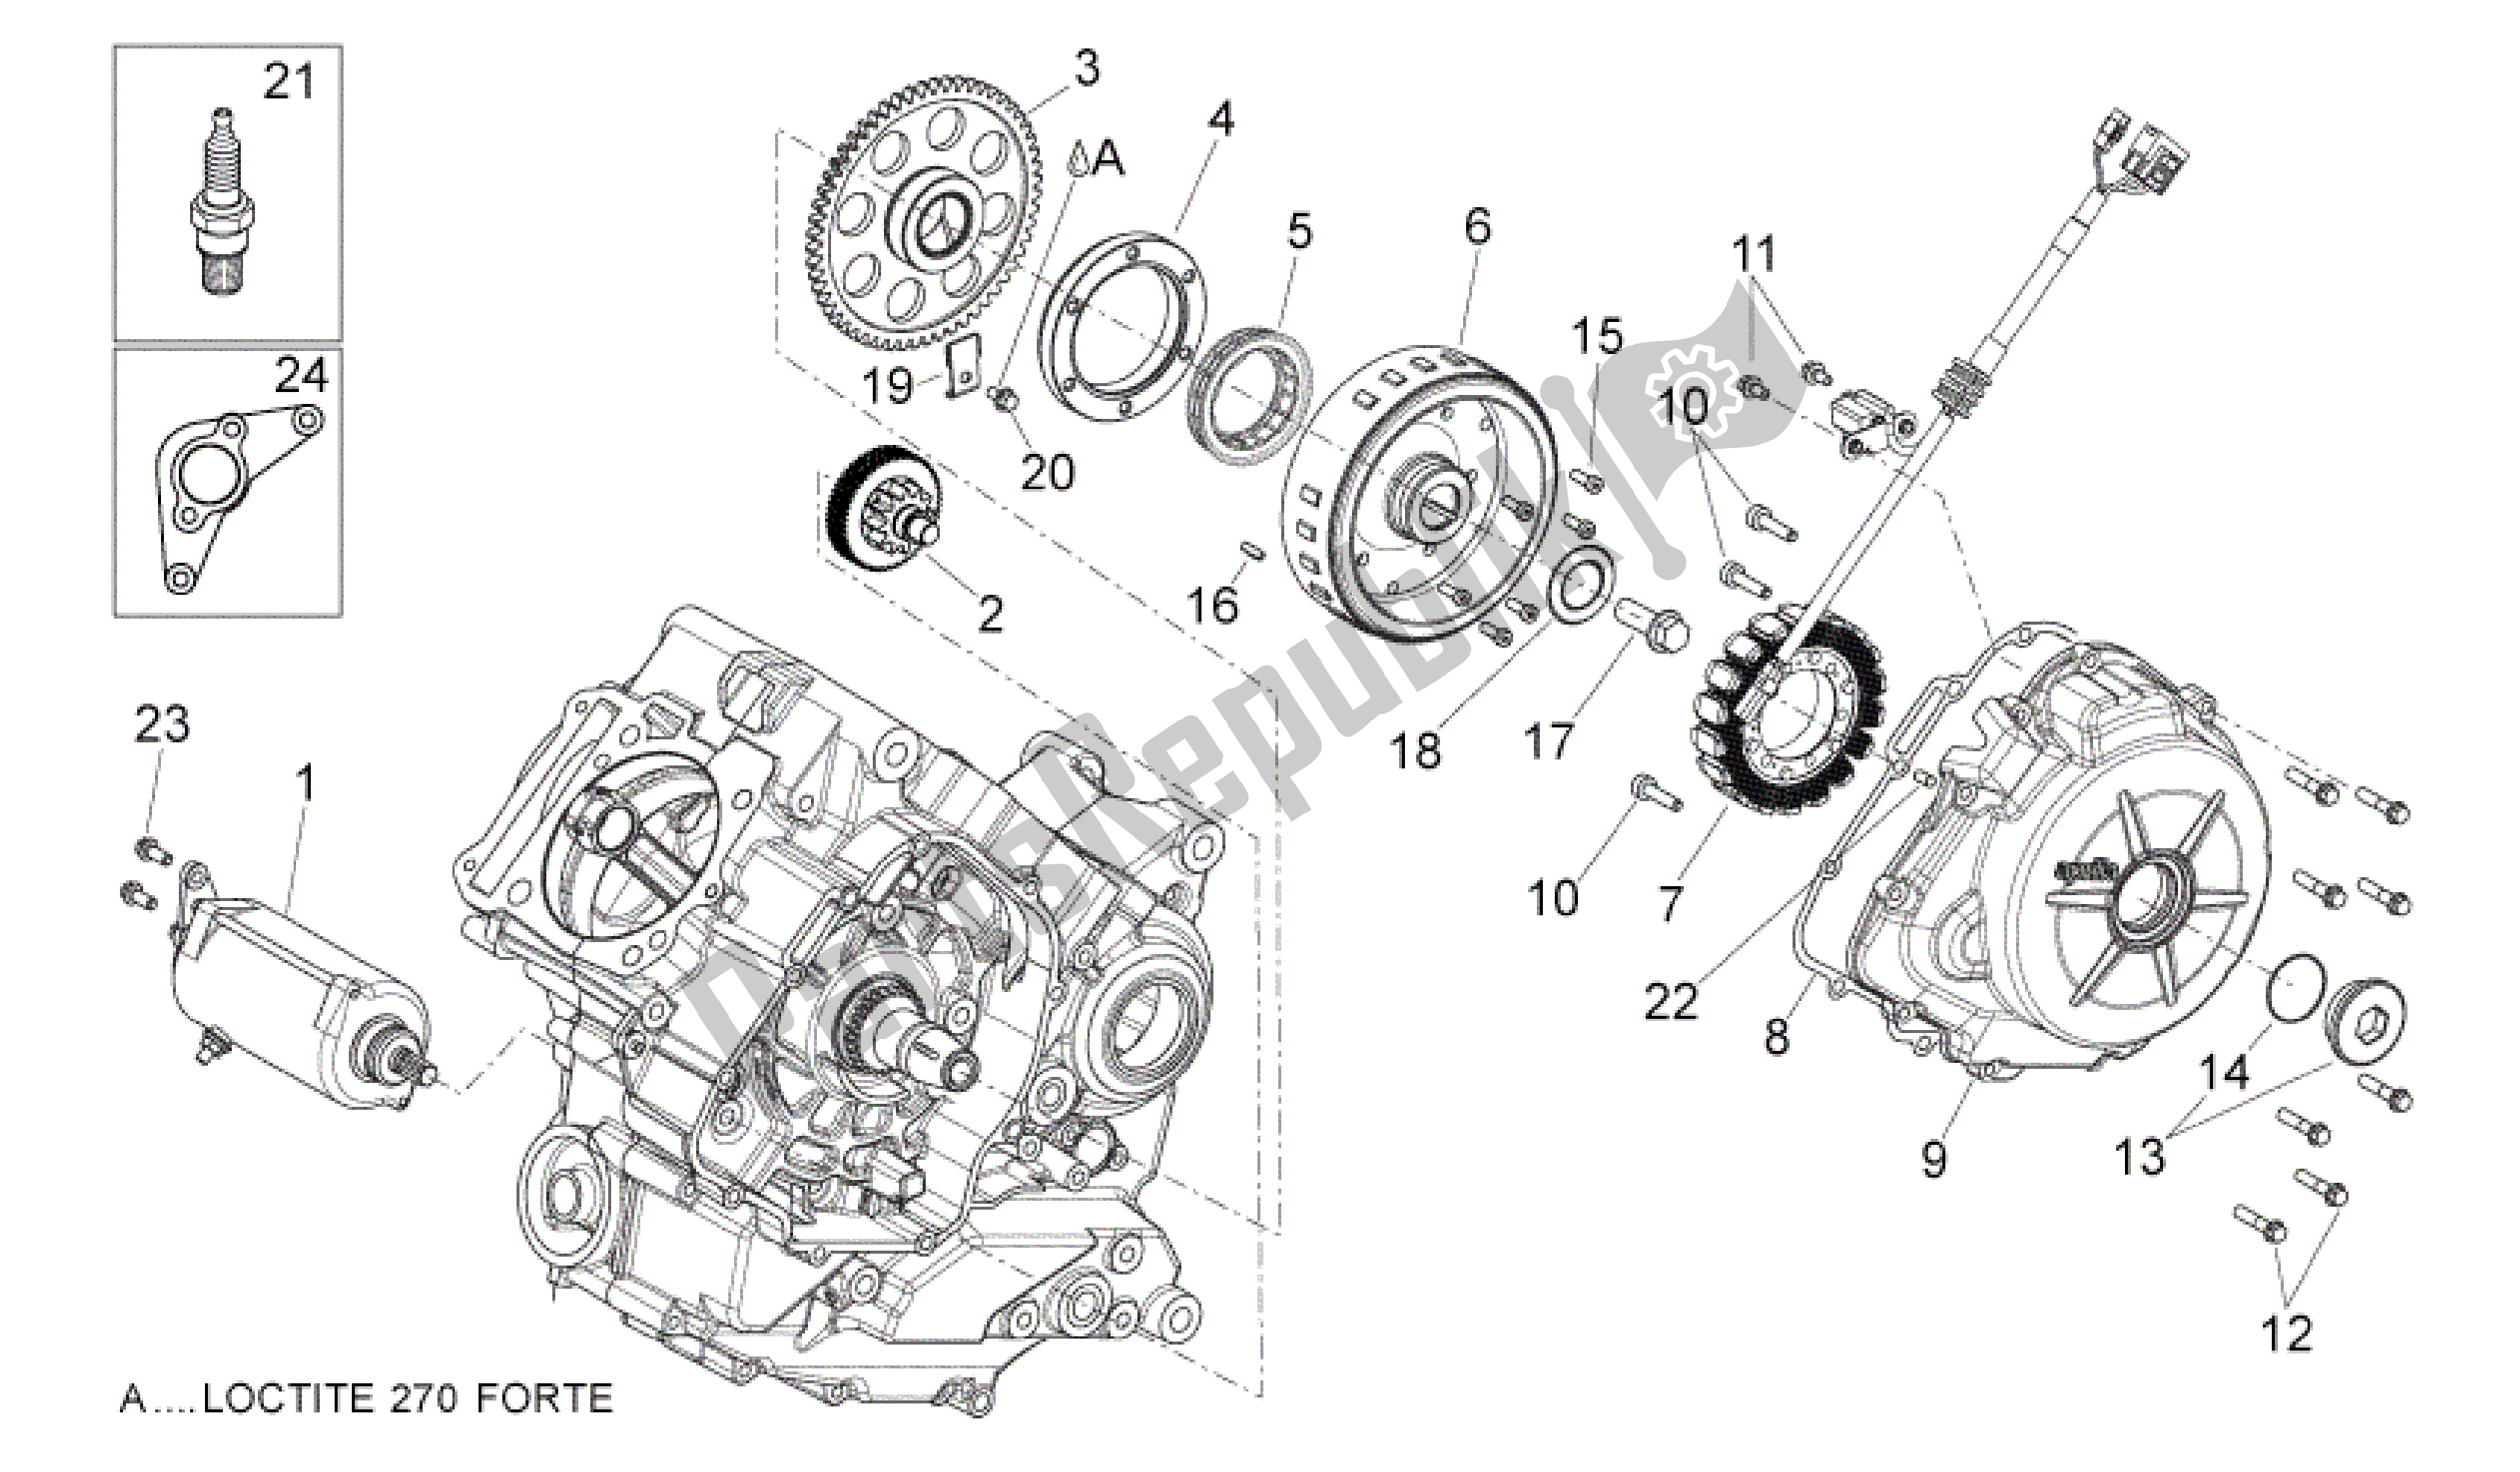 All parts for the Ignition Unit of the Aprilia Shiver 750 2007 - 2009